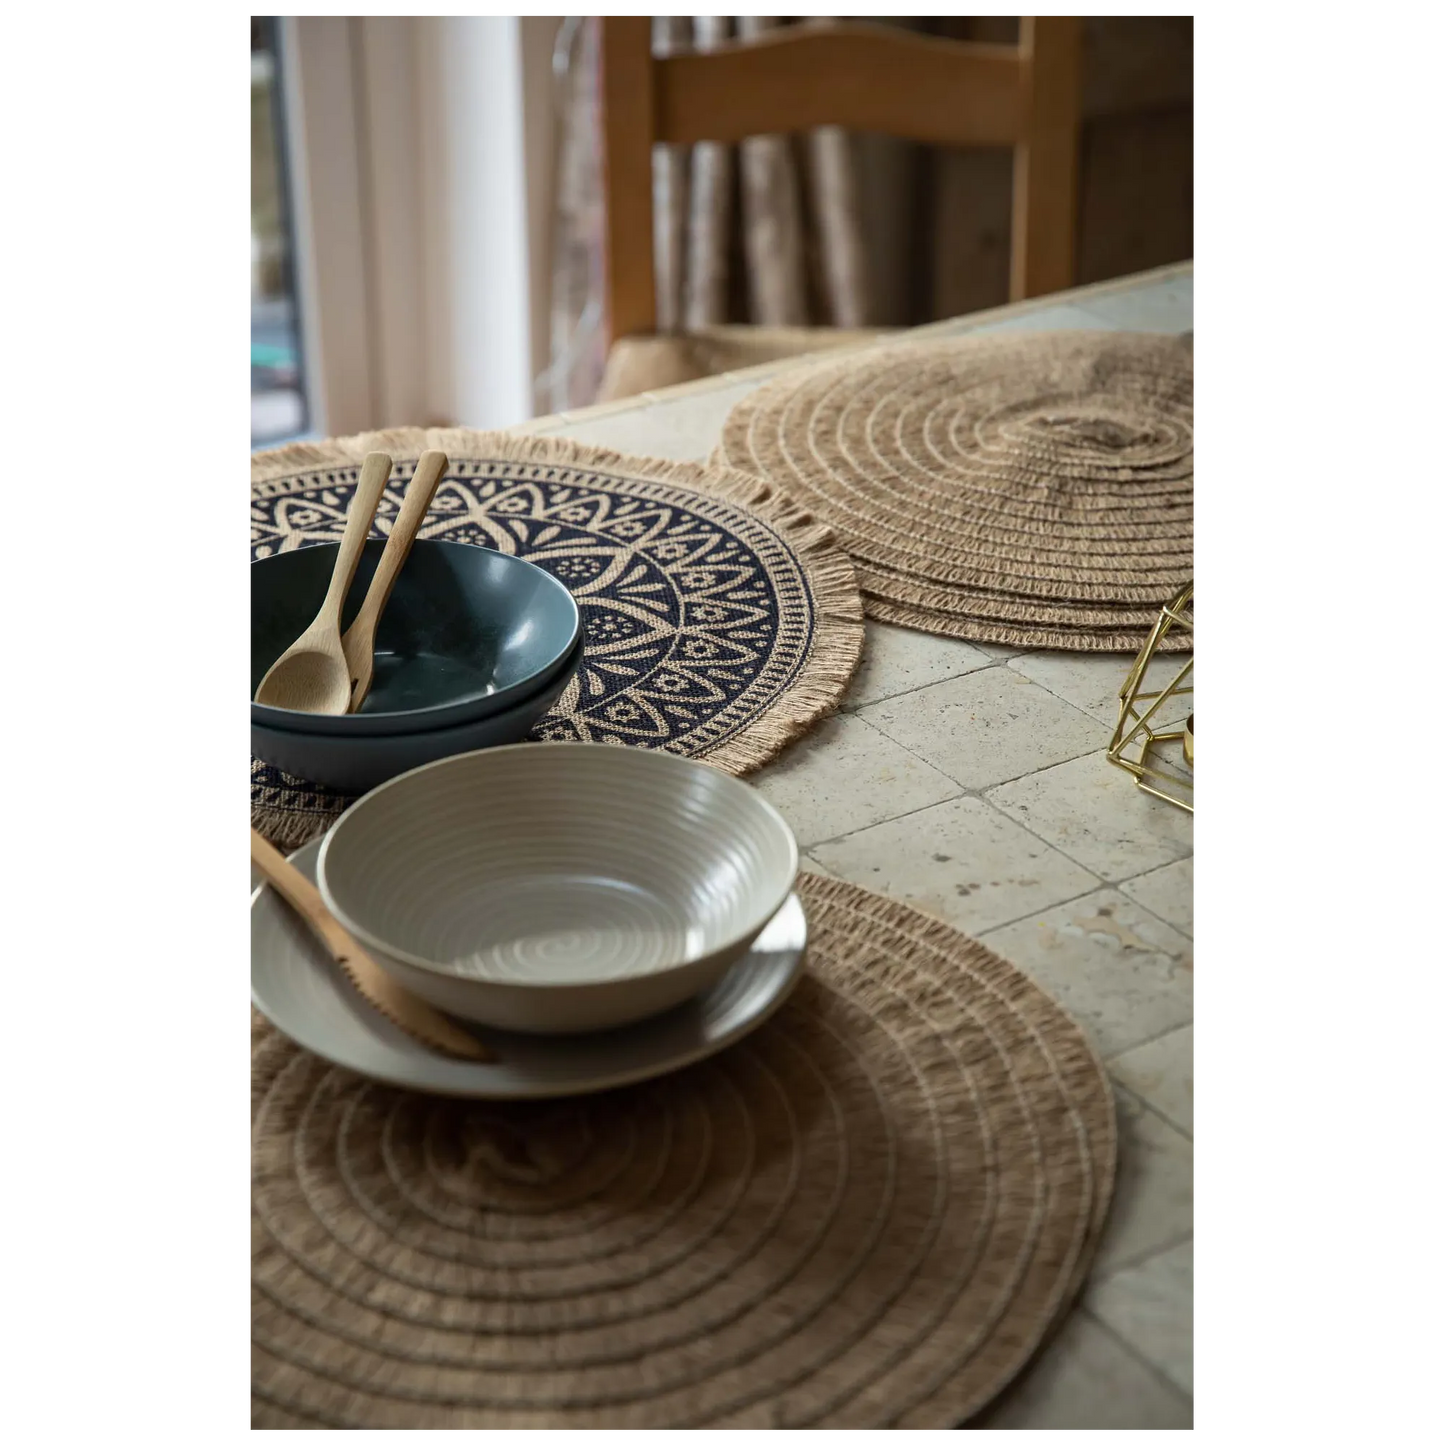 Set of 4 Jute Placemats, Natural Hessian Round Table Mats, 41cm